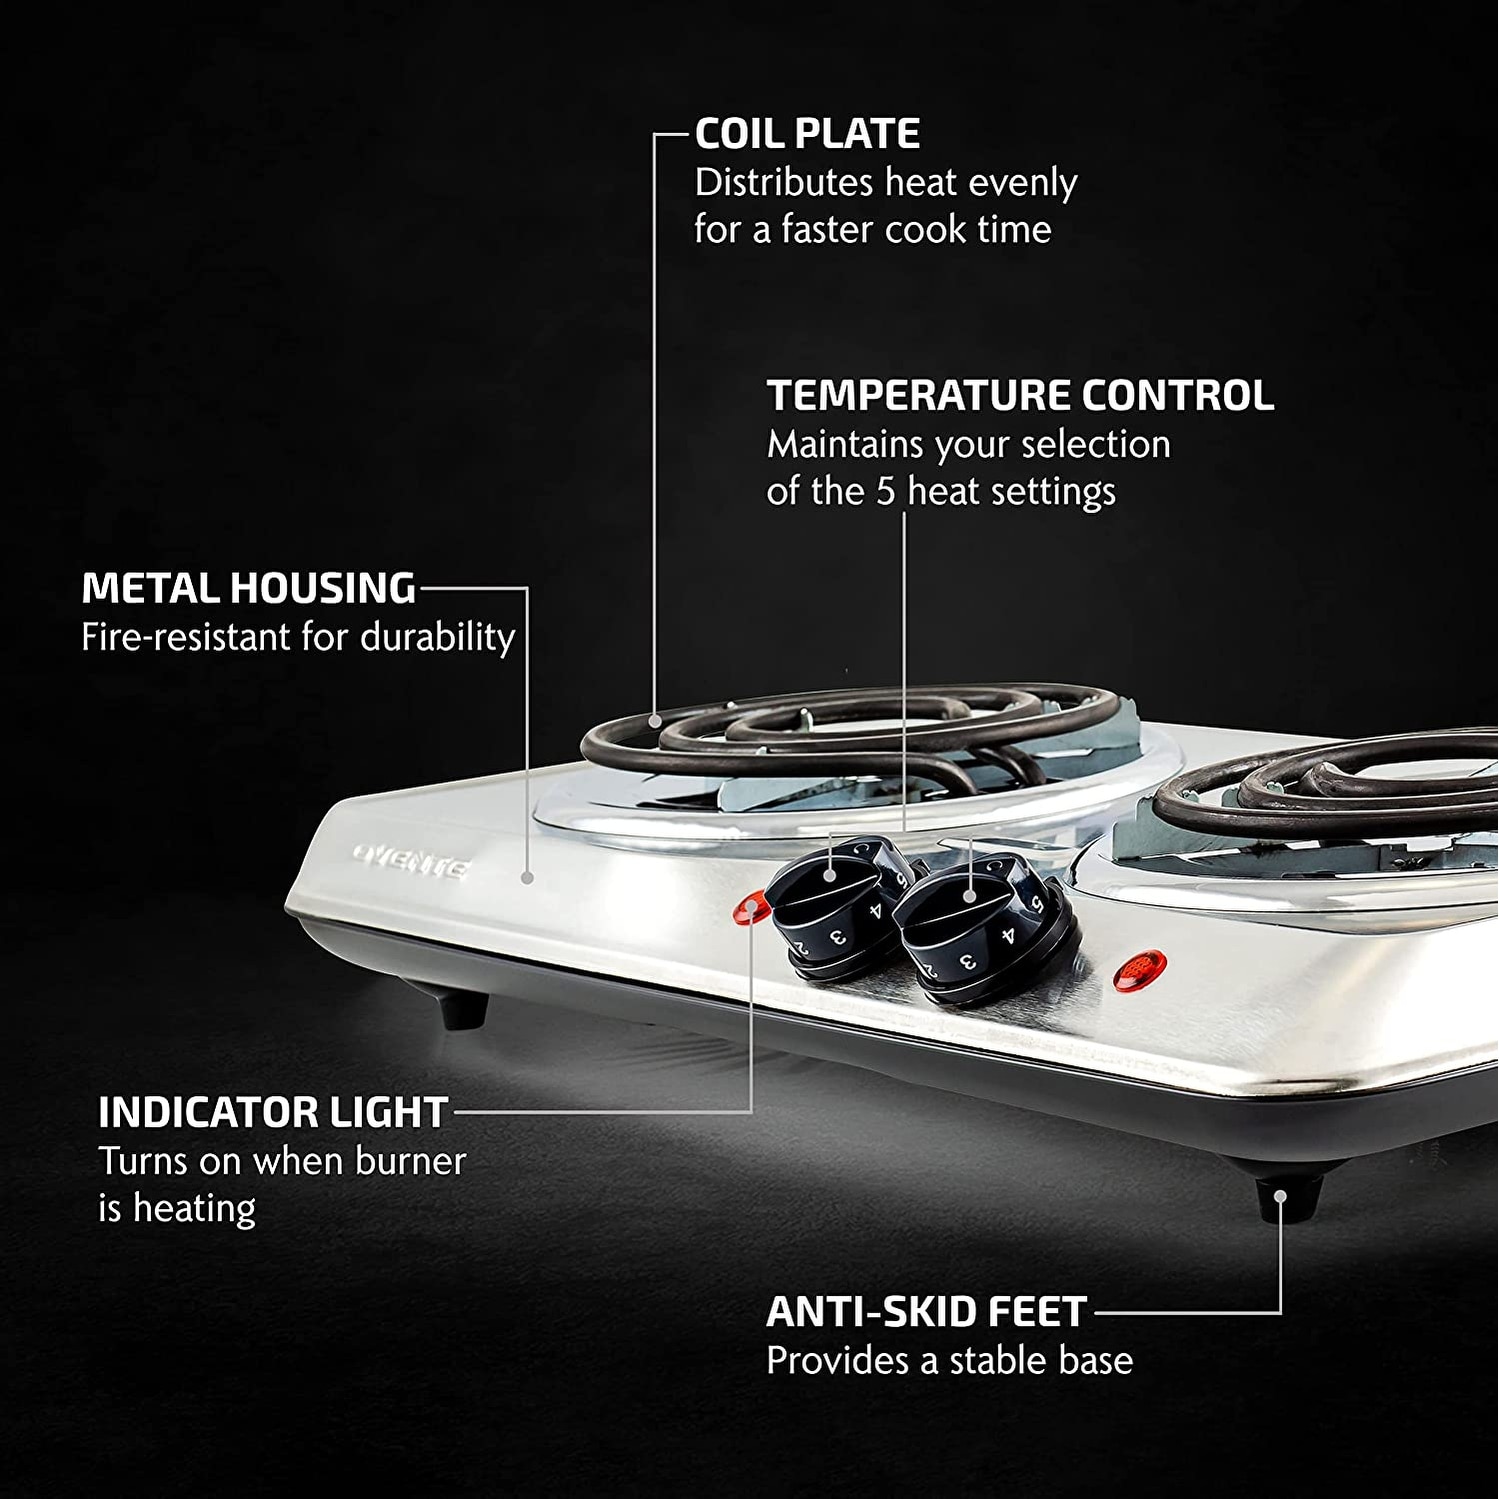 Ovente Countertop Infrared Burner 1500 Watts Ceramic Double Plate Cooktop